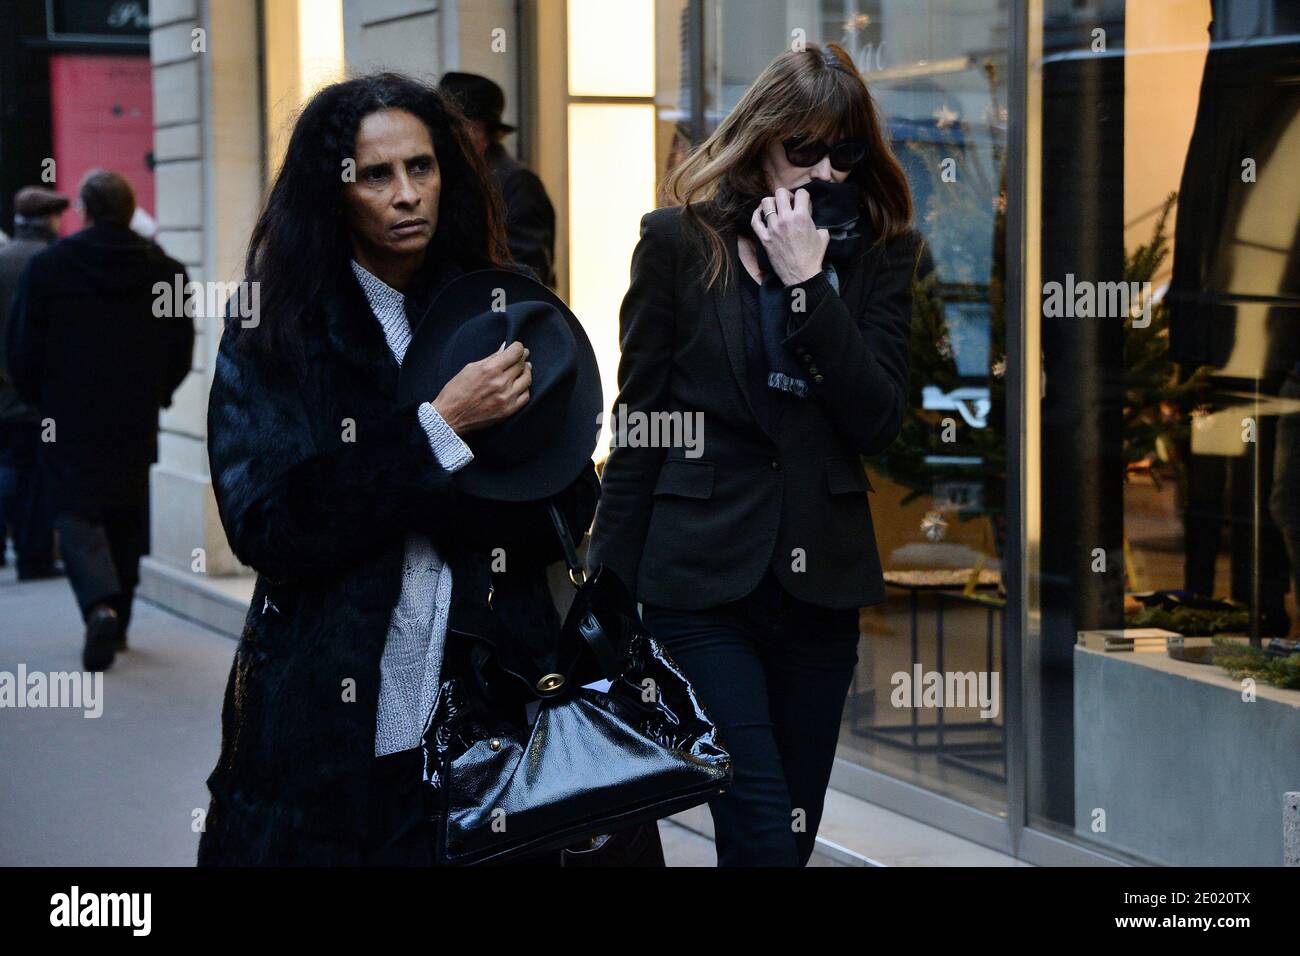 Please hide the children's faces prior to the publication Carla Bruni-Sarkozy and Karine Silla attending a tribute mass for Kate Barry held at Saint Roch church in Paris, France on December 19, 2013. Photographer Kate Barry, the daughter of Jane Birkin and John Barry has been found dead on December 11 after falling from the window of her apartment in Paris. She was 46. Photo by ABACAPRESS.COM Stock Photo